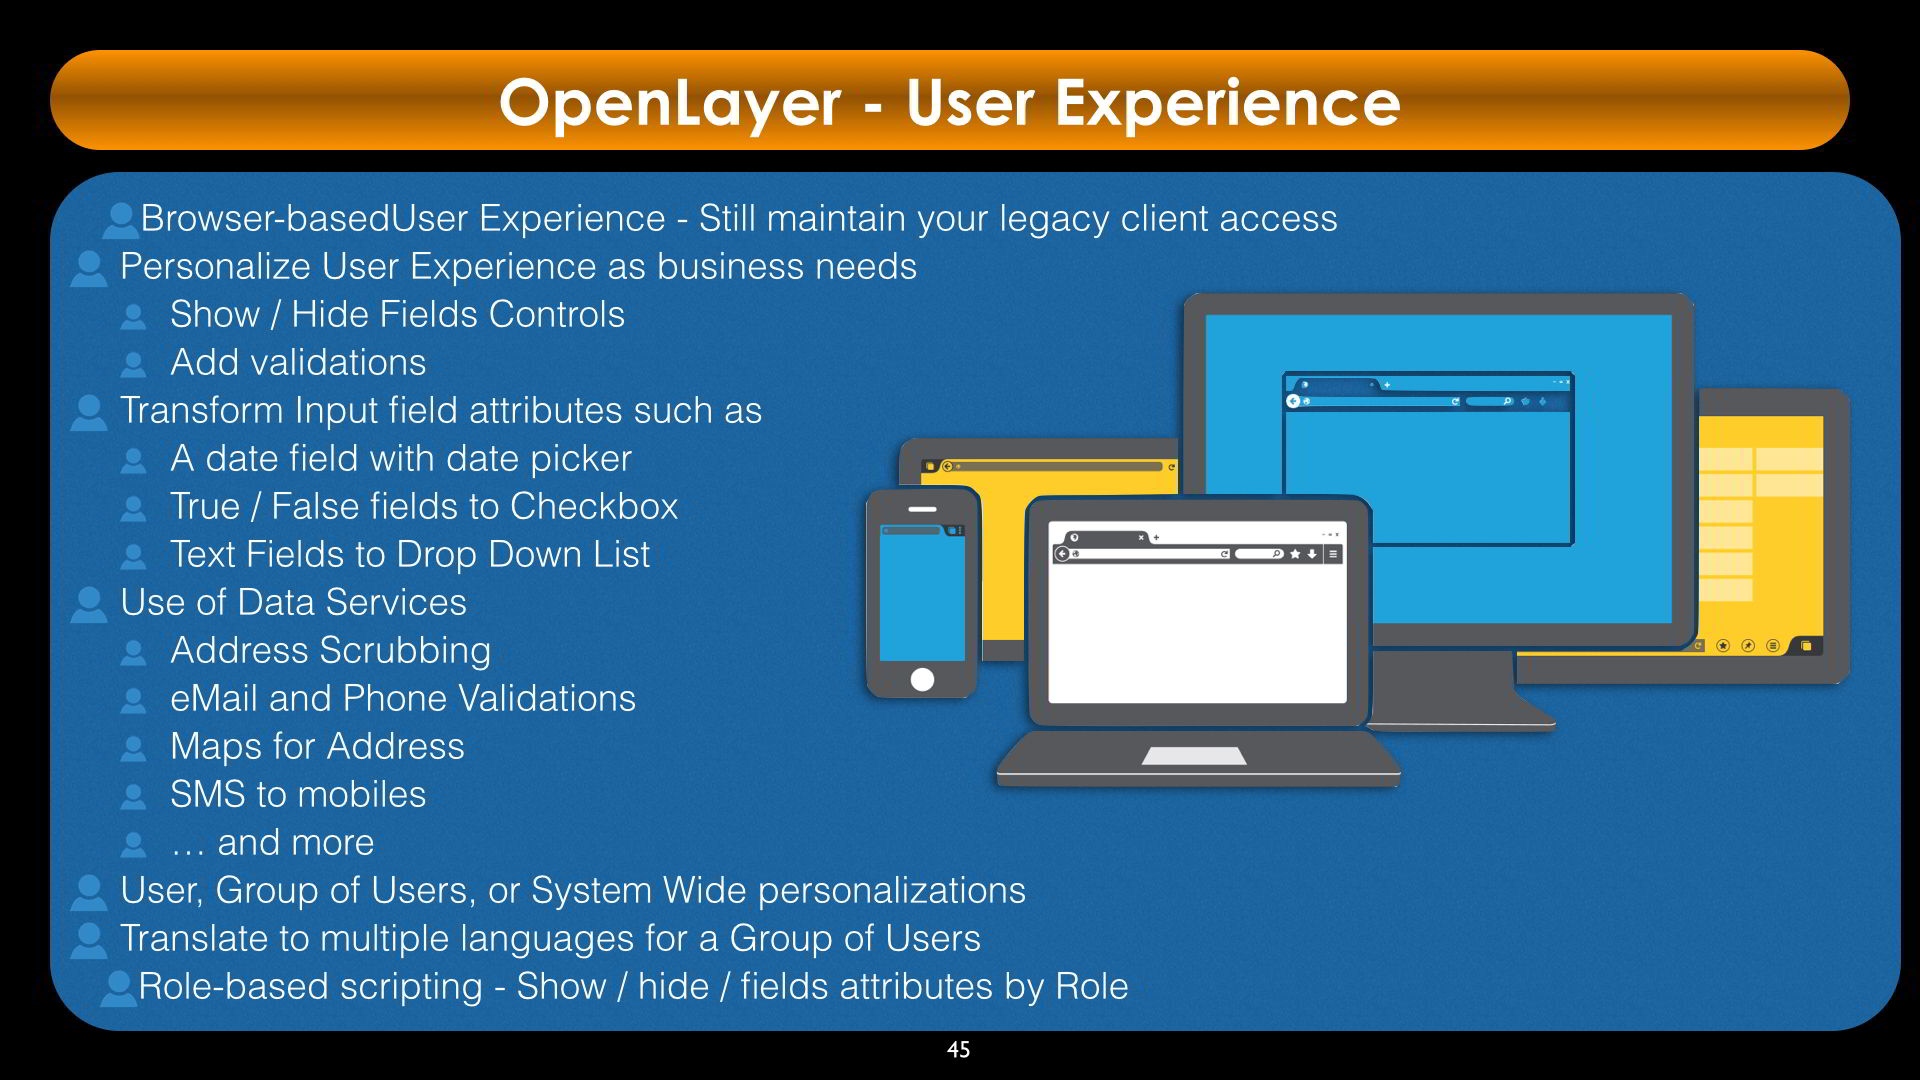 OpenLayer, Browser based User Experience